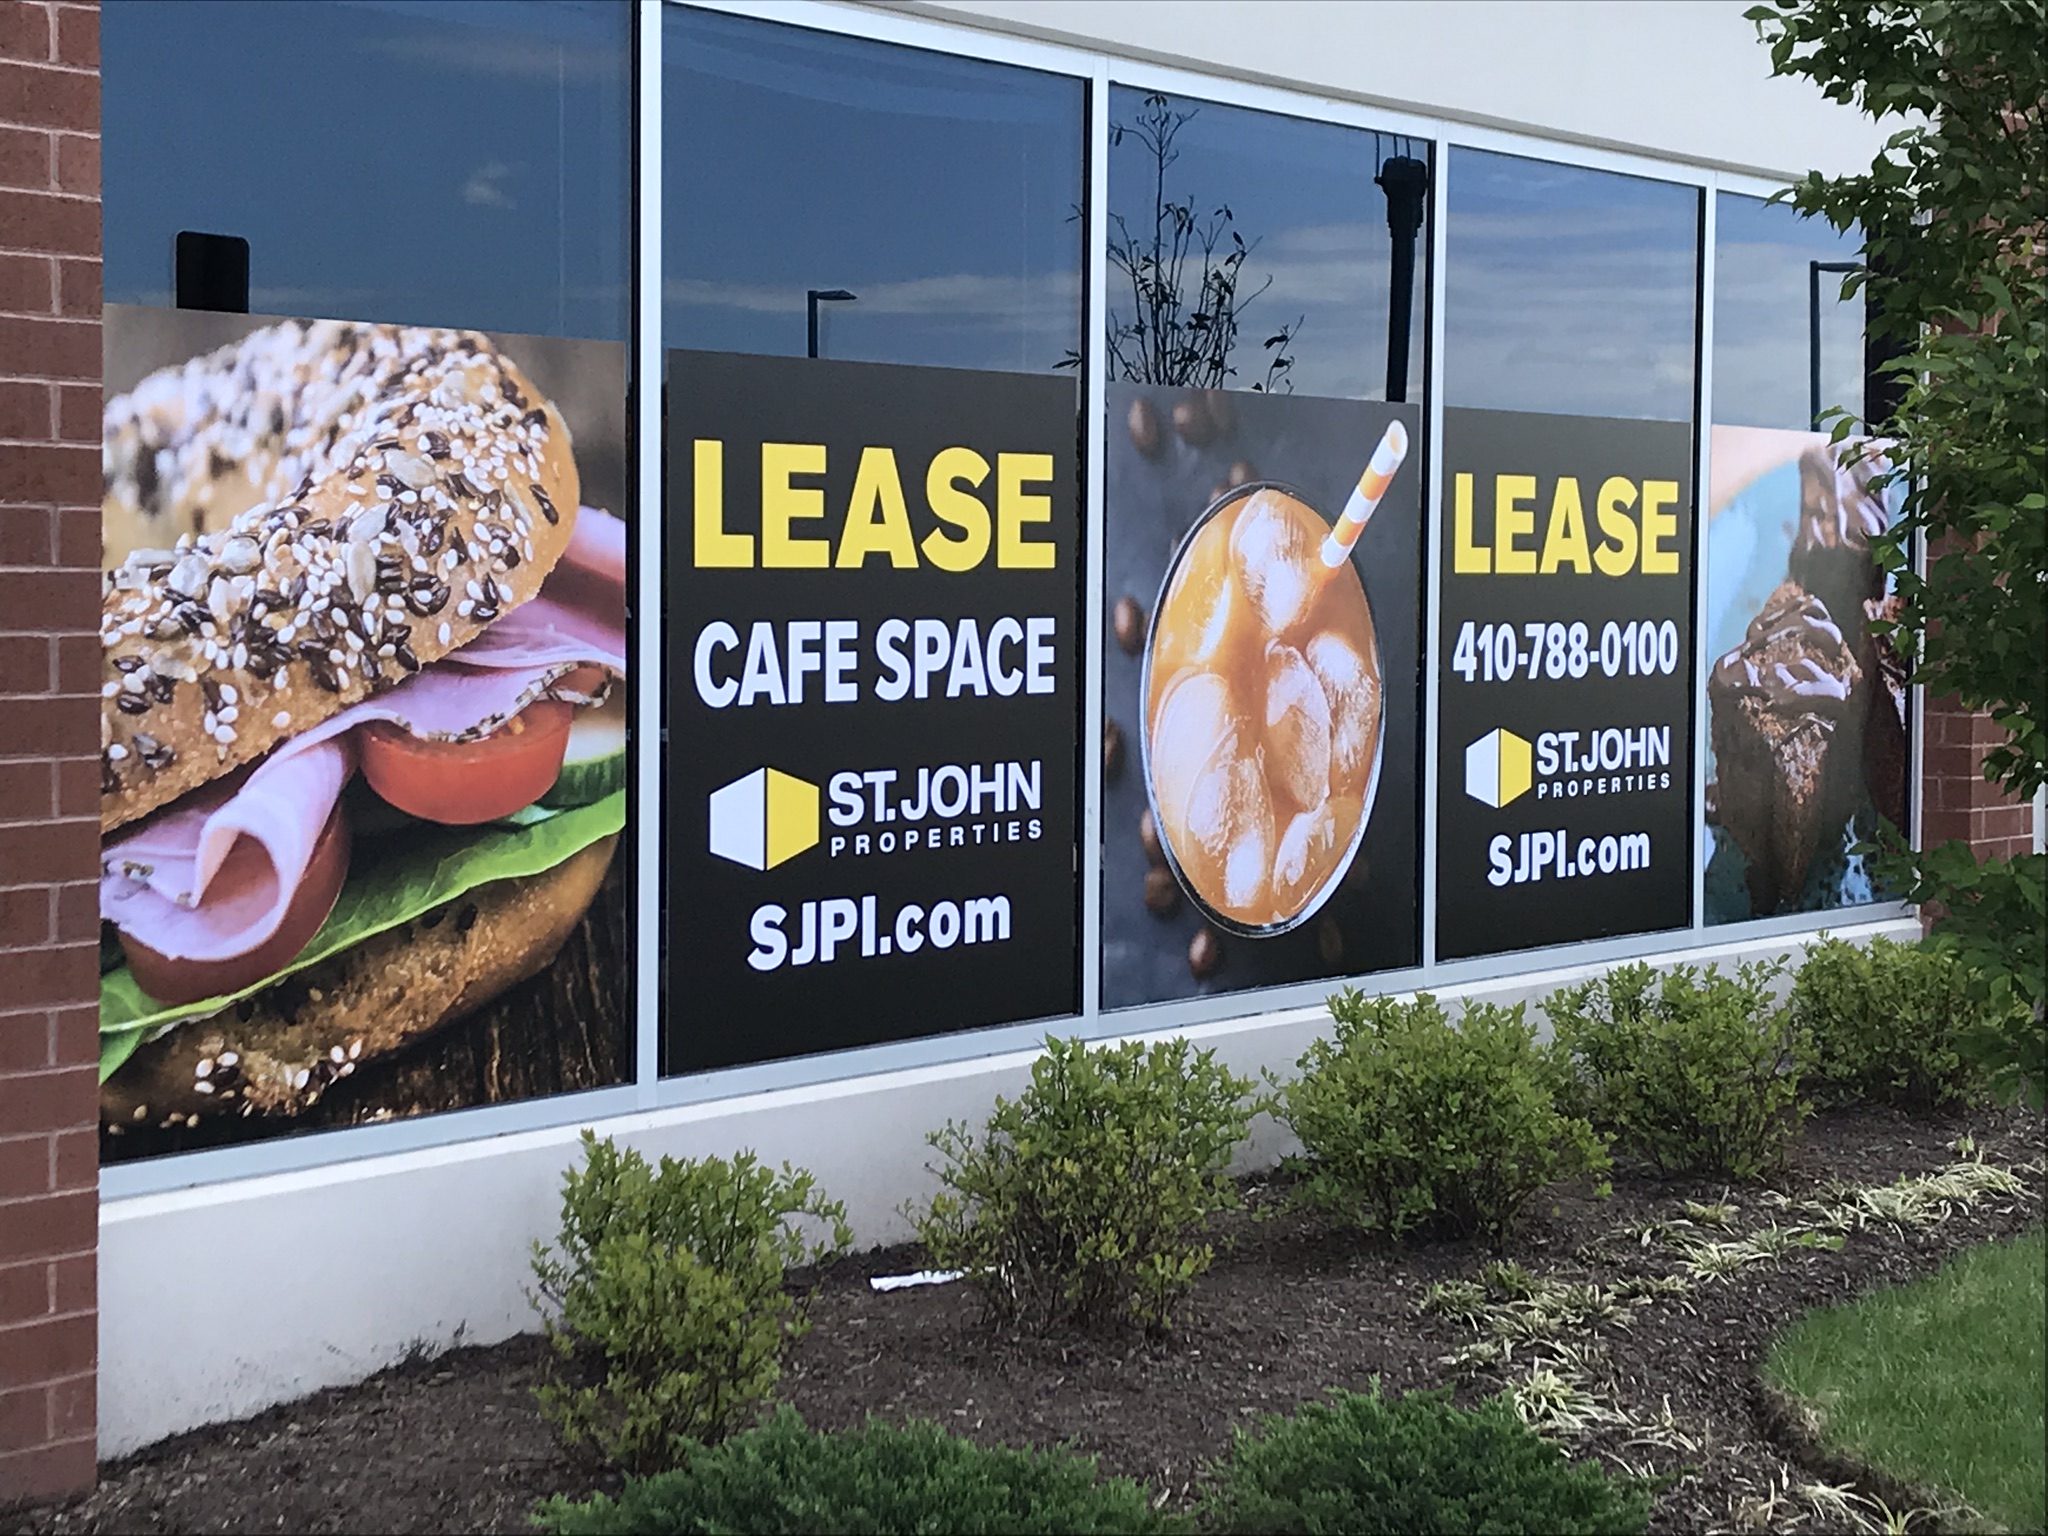 Lease Cafe Space Outside Window Advertisement